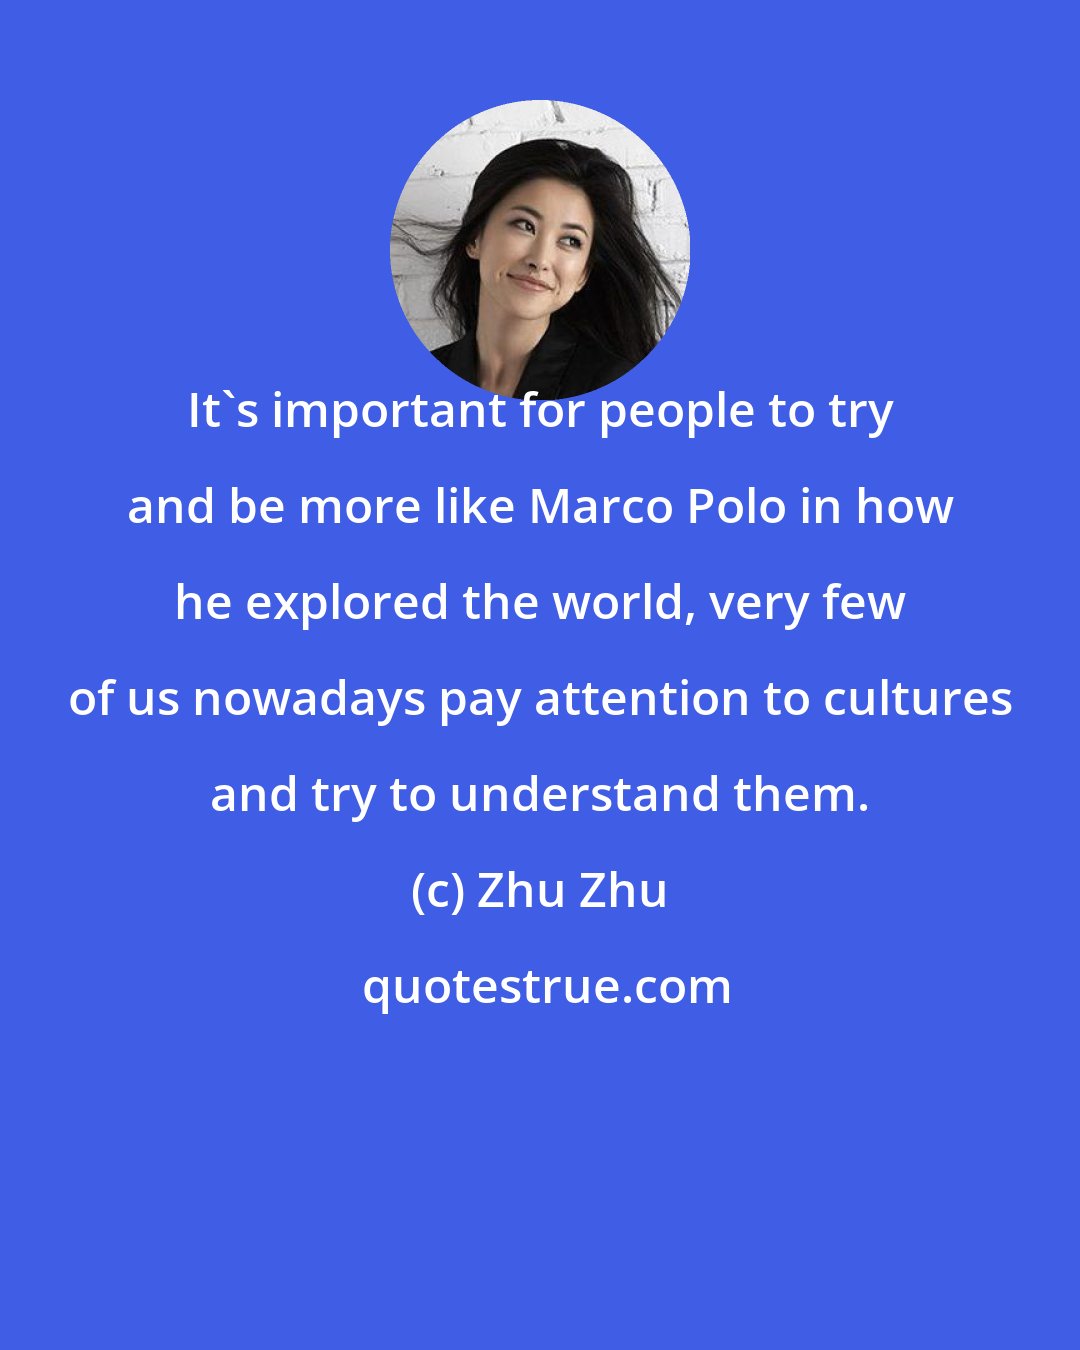 Zhu Zhu: It's important for people to try and be more like Marco Polo in how he explored the world, very few of us nowadays pay attention to cultures and try to understand them.